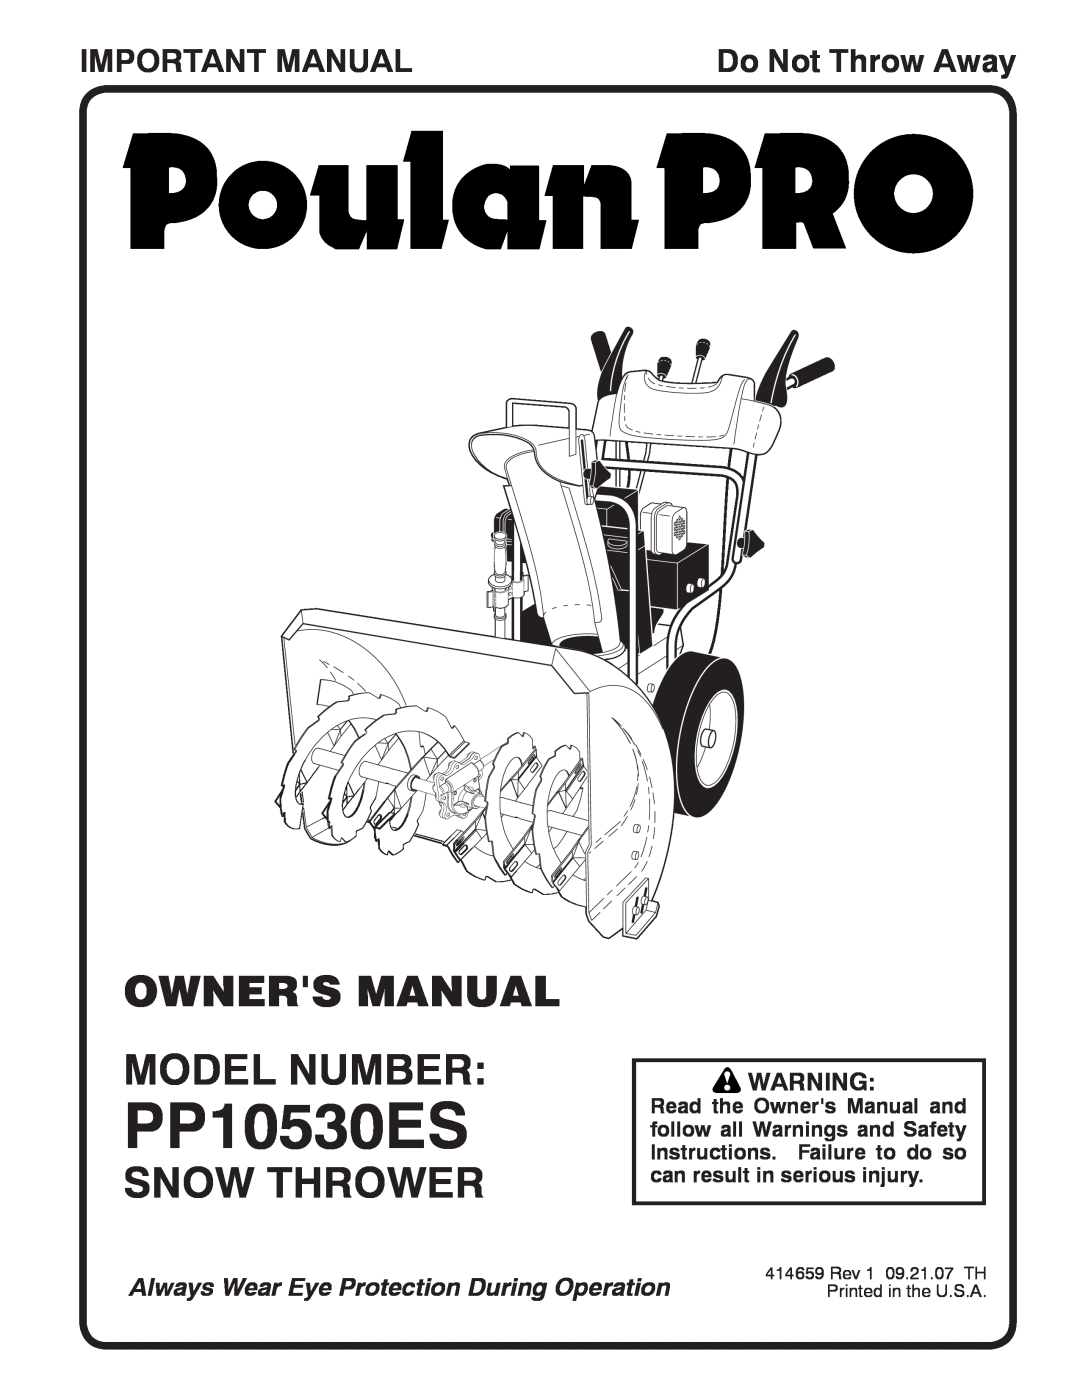 Poulan 414659 owner manual Snow Thrower, Important Manual, PP10530ES, Do Not Throw Away 